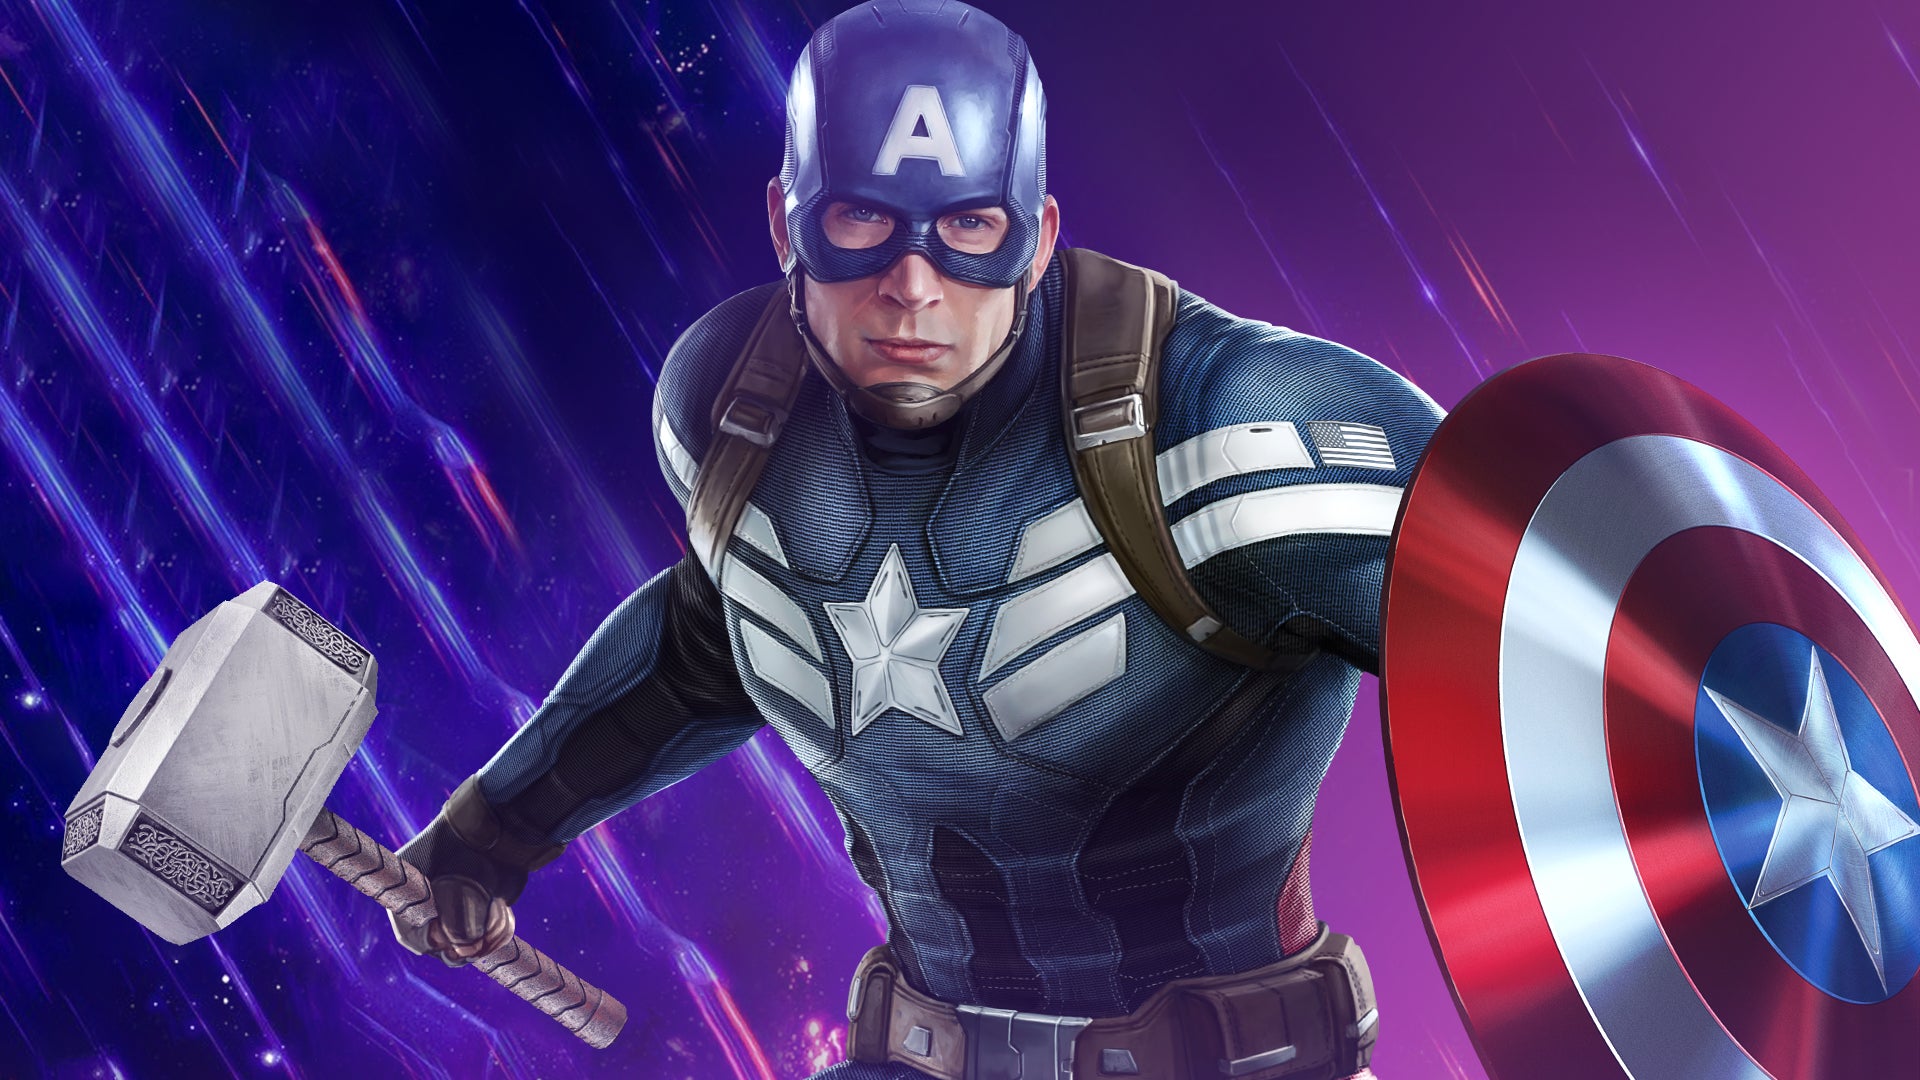 Captain America on a purple background with a hammer.